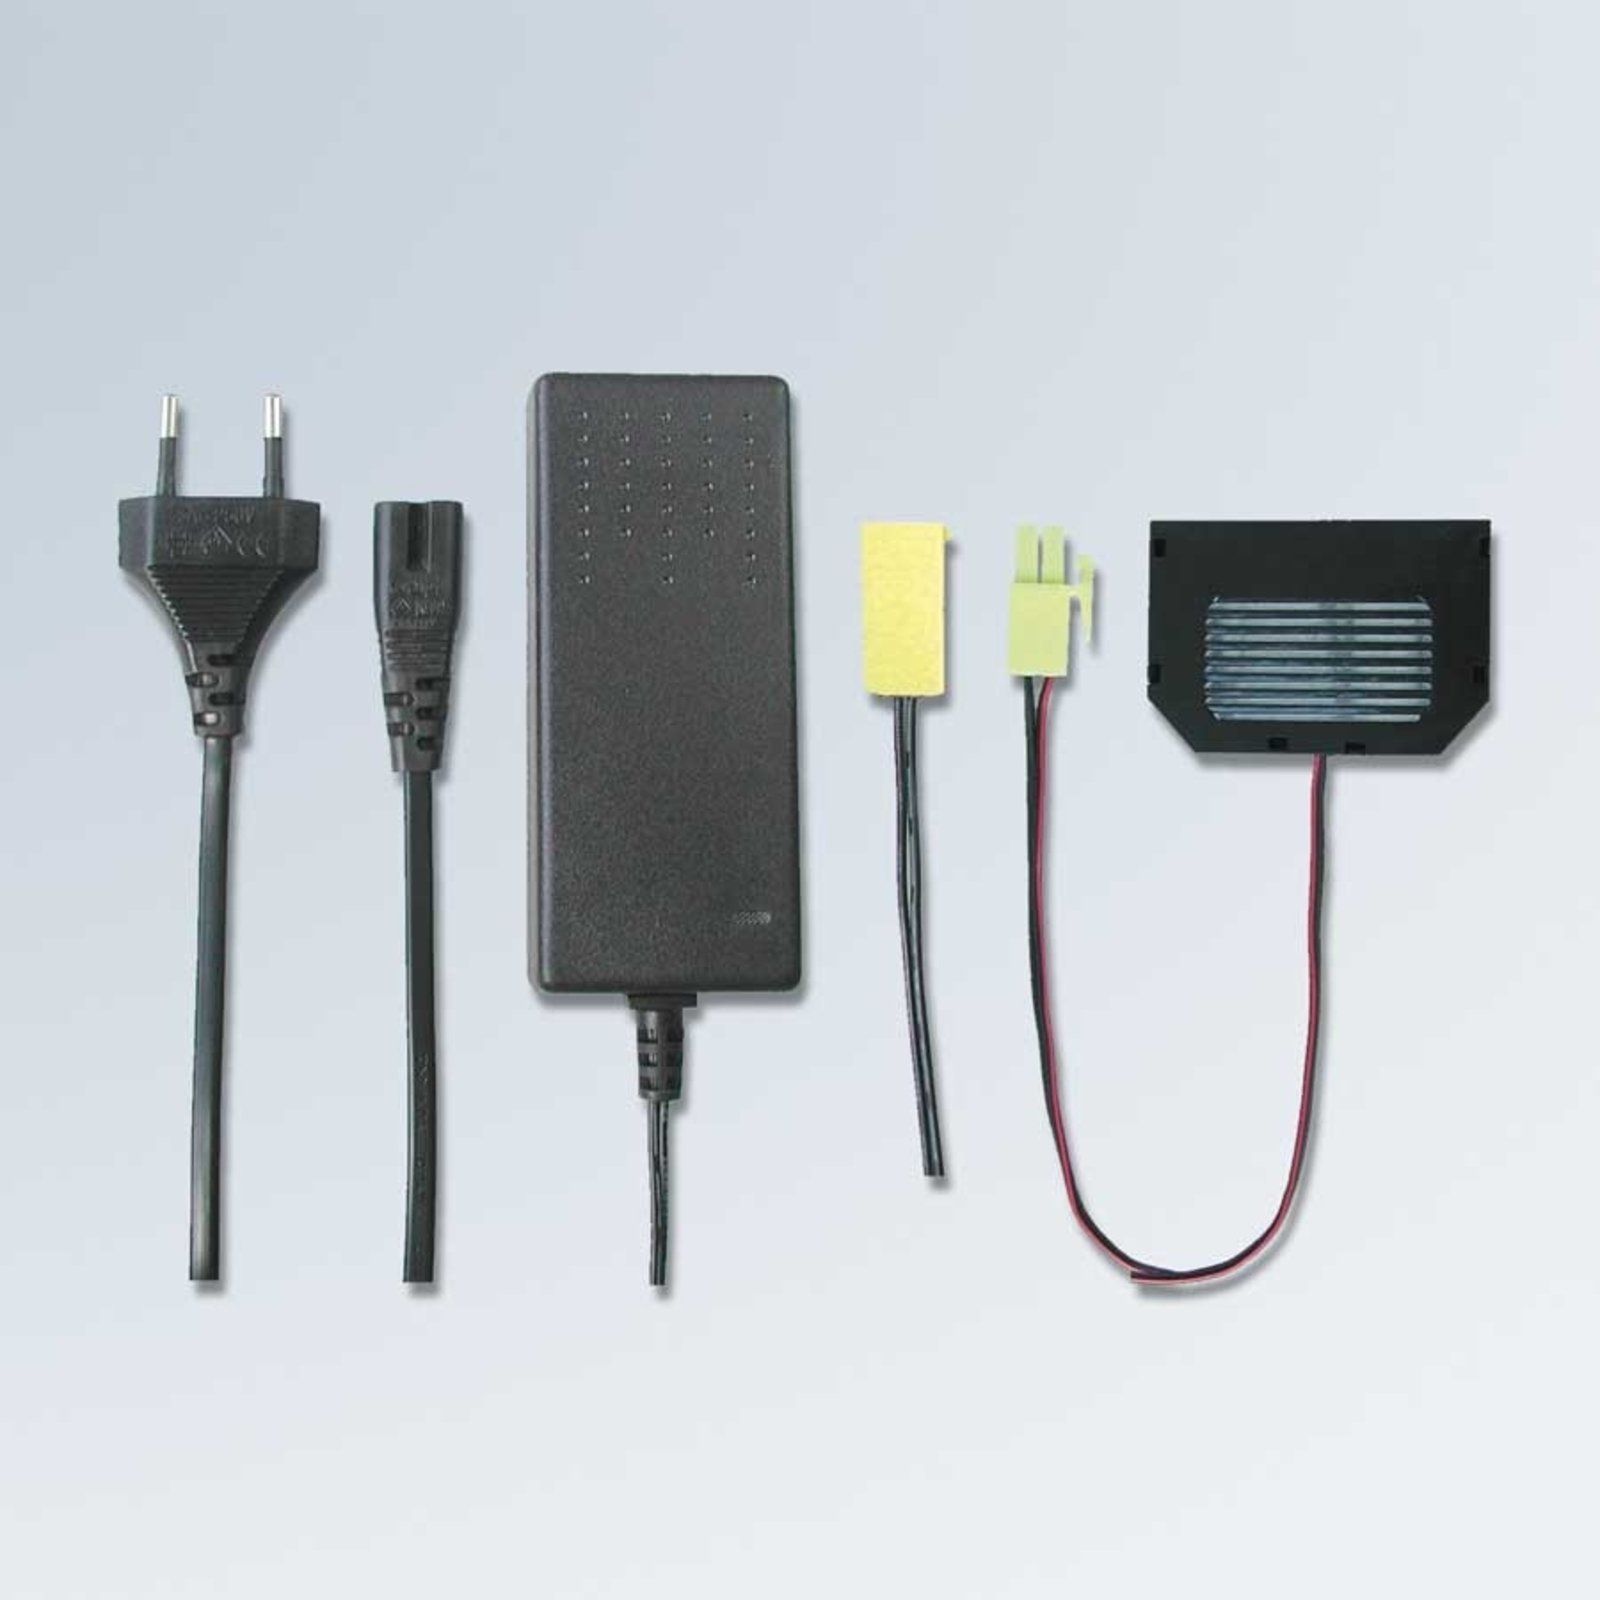 Power supply for LED lights with Europlug